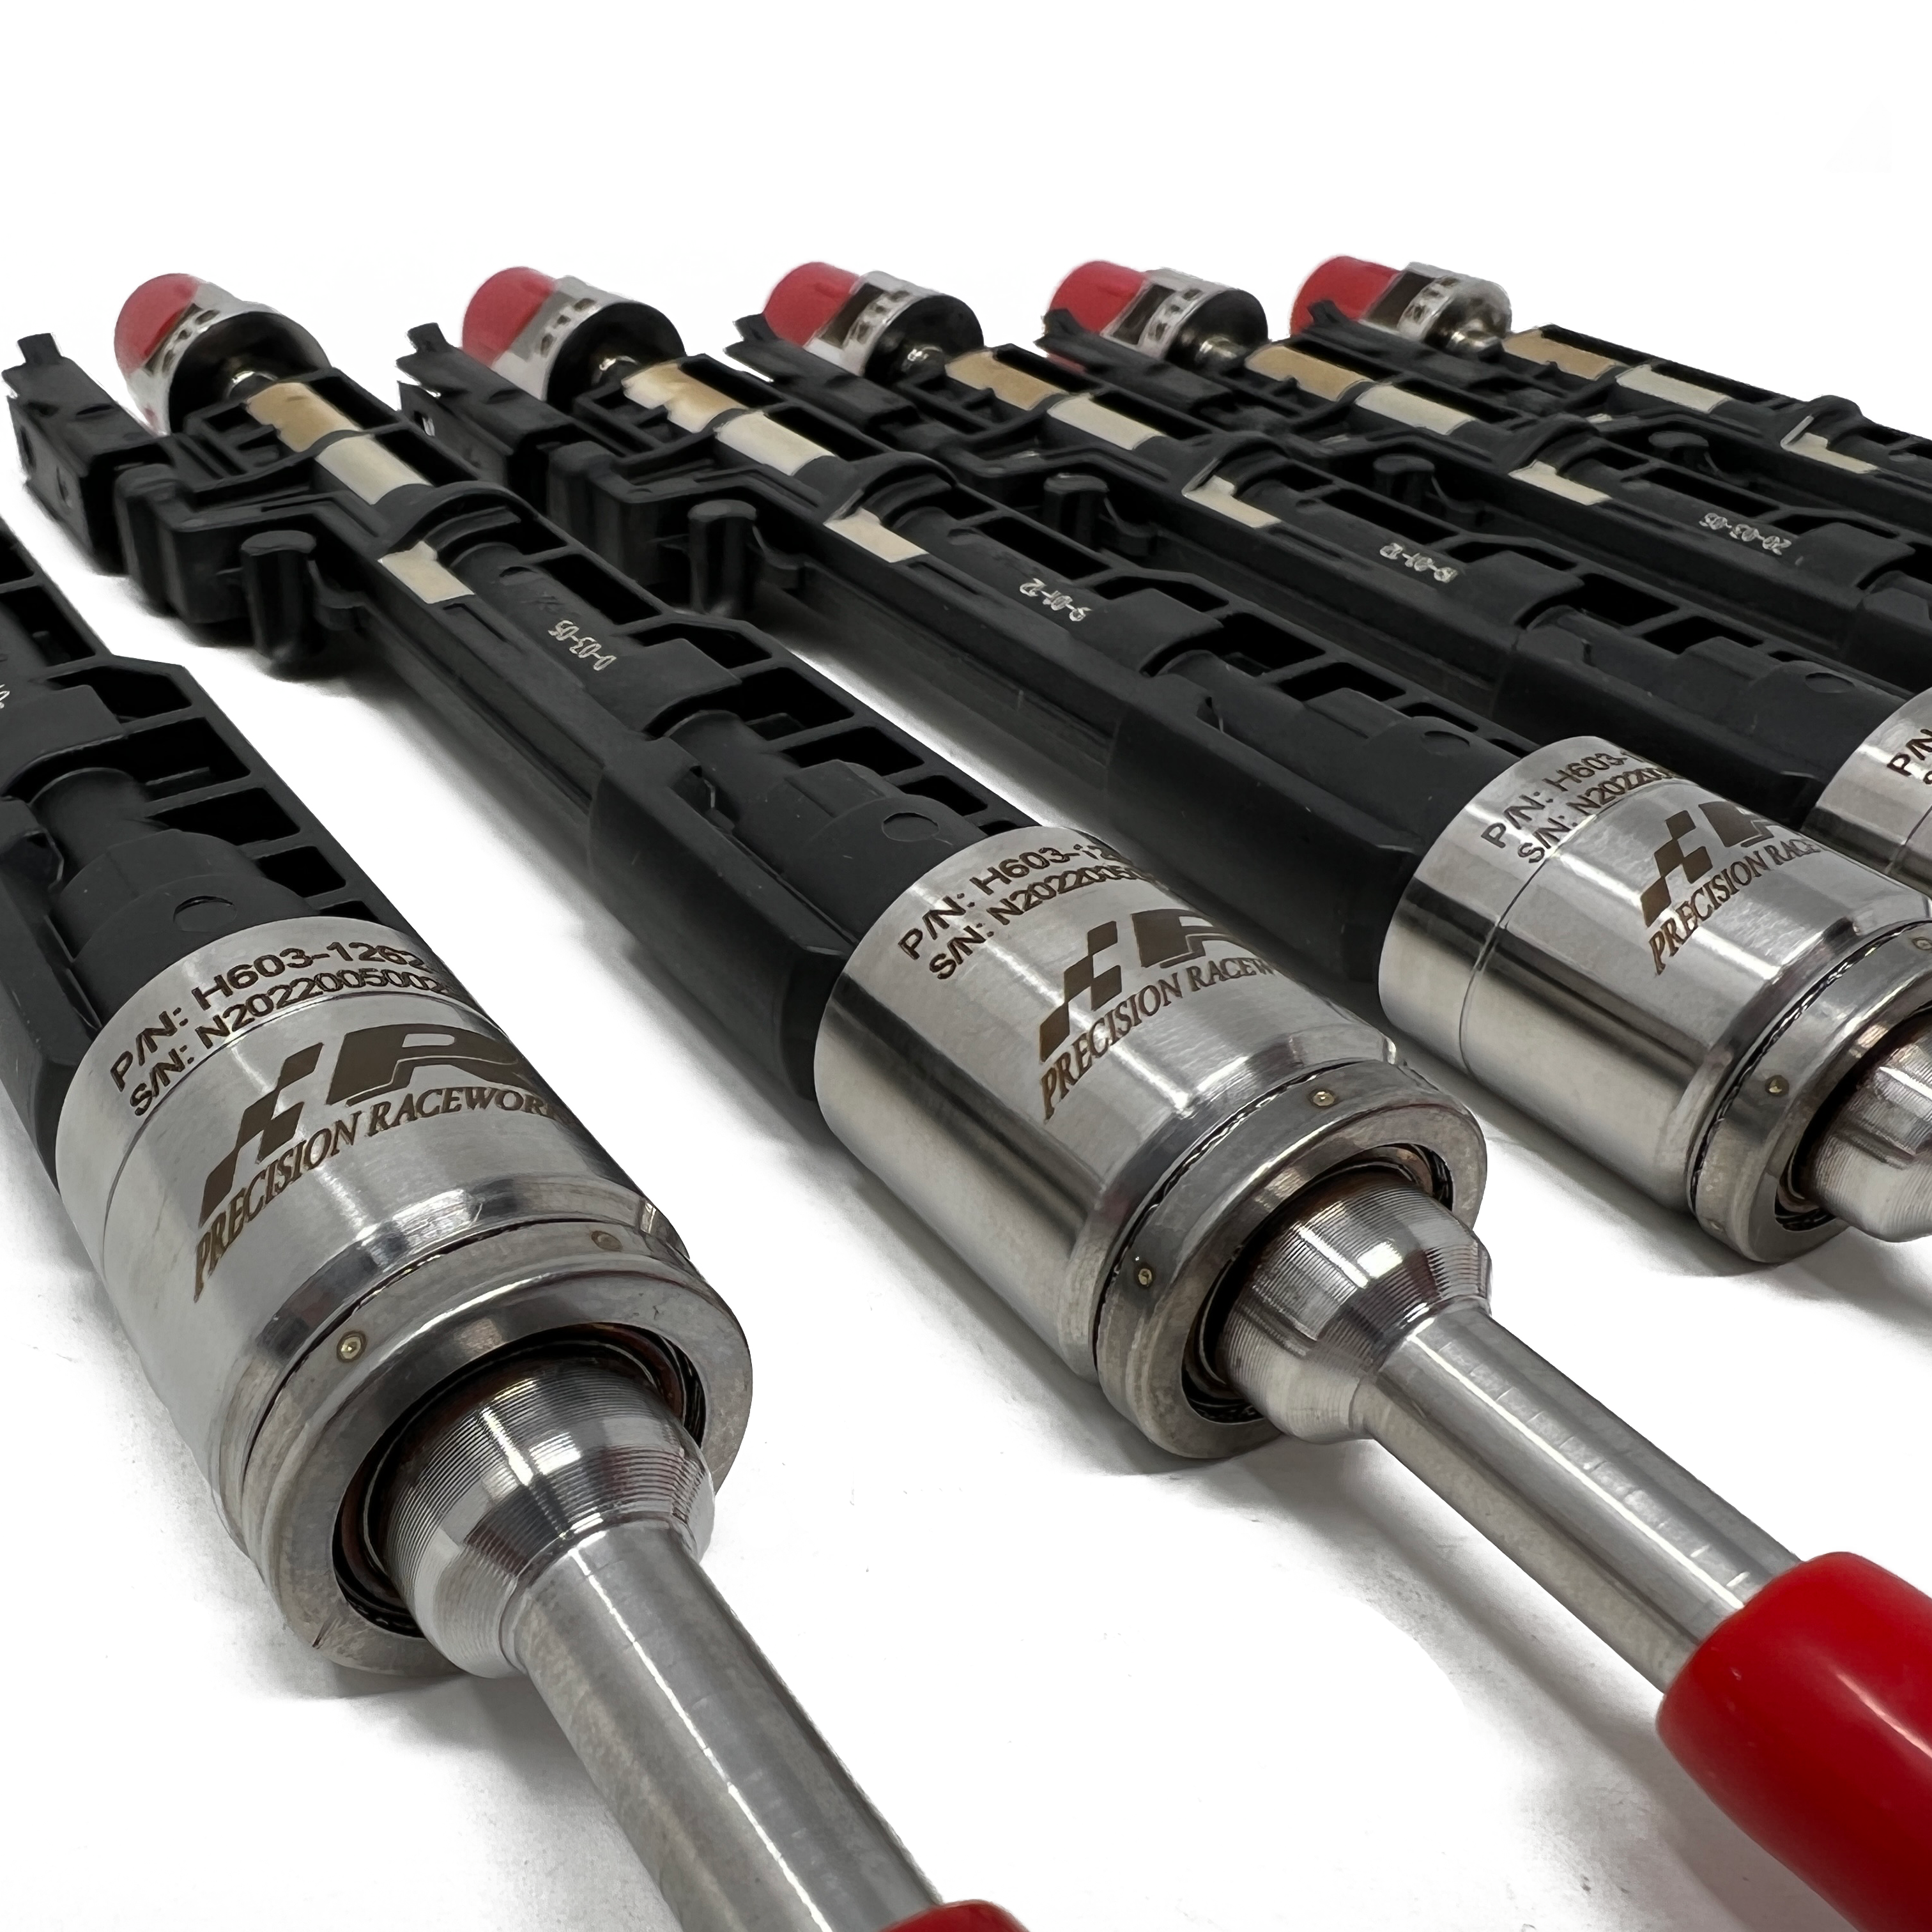 BMW N55/S55 Stage 2 Direct Injectors